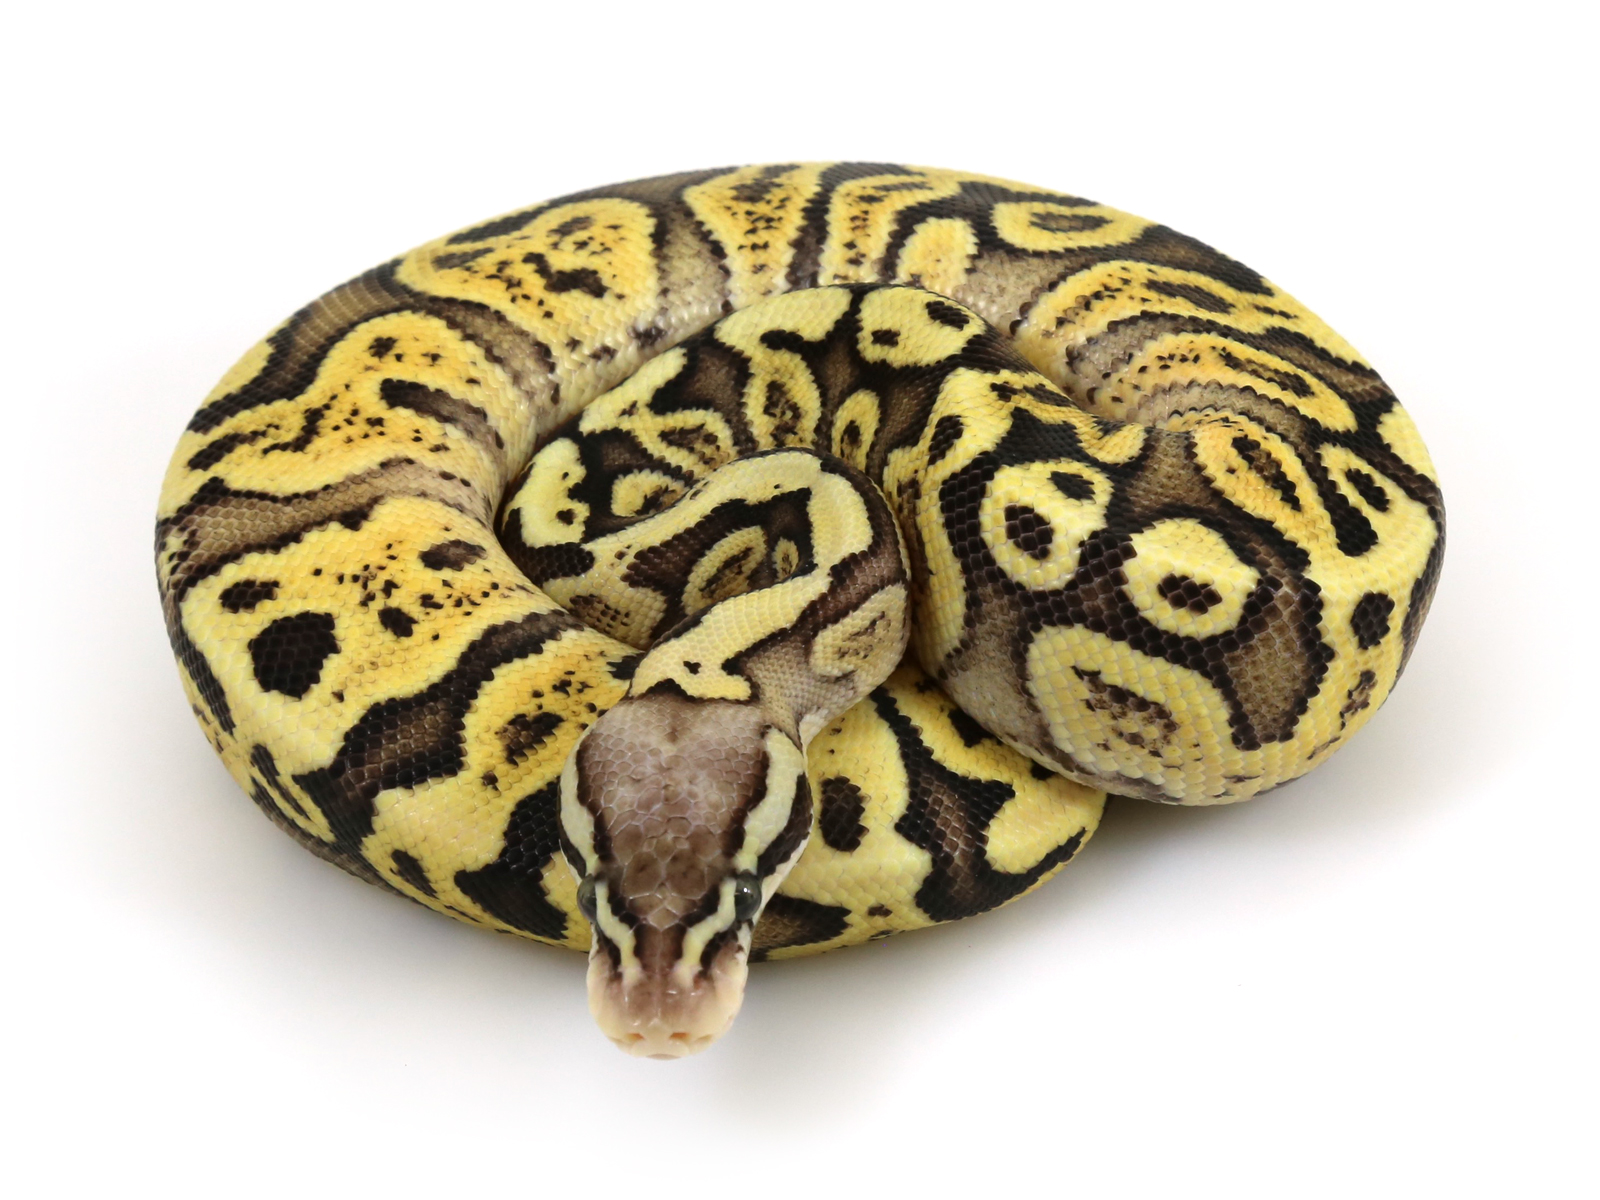 Gallery of Lesser Ghi Ball Python.